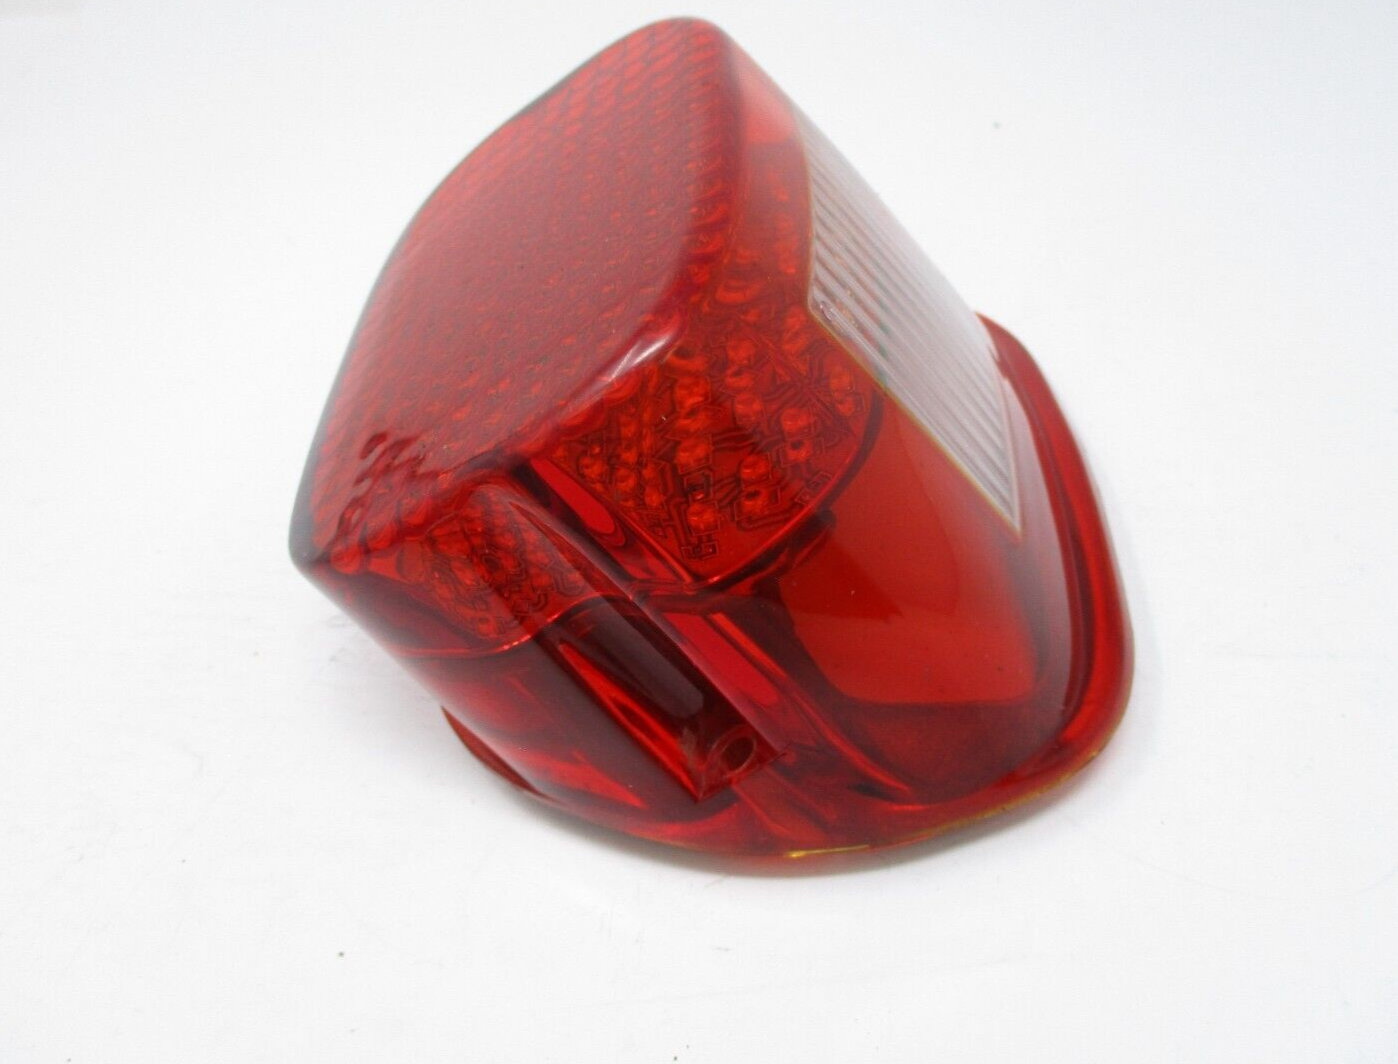 LED Taillight with Clear Lens PFX214